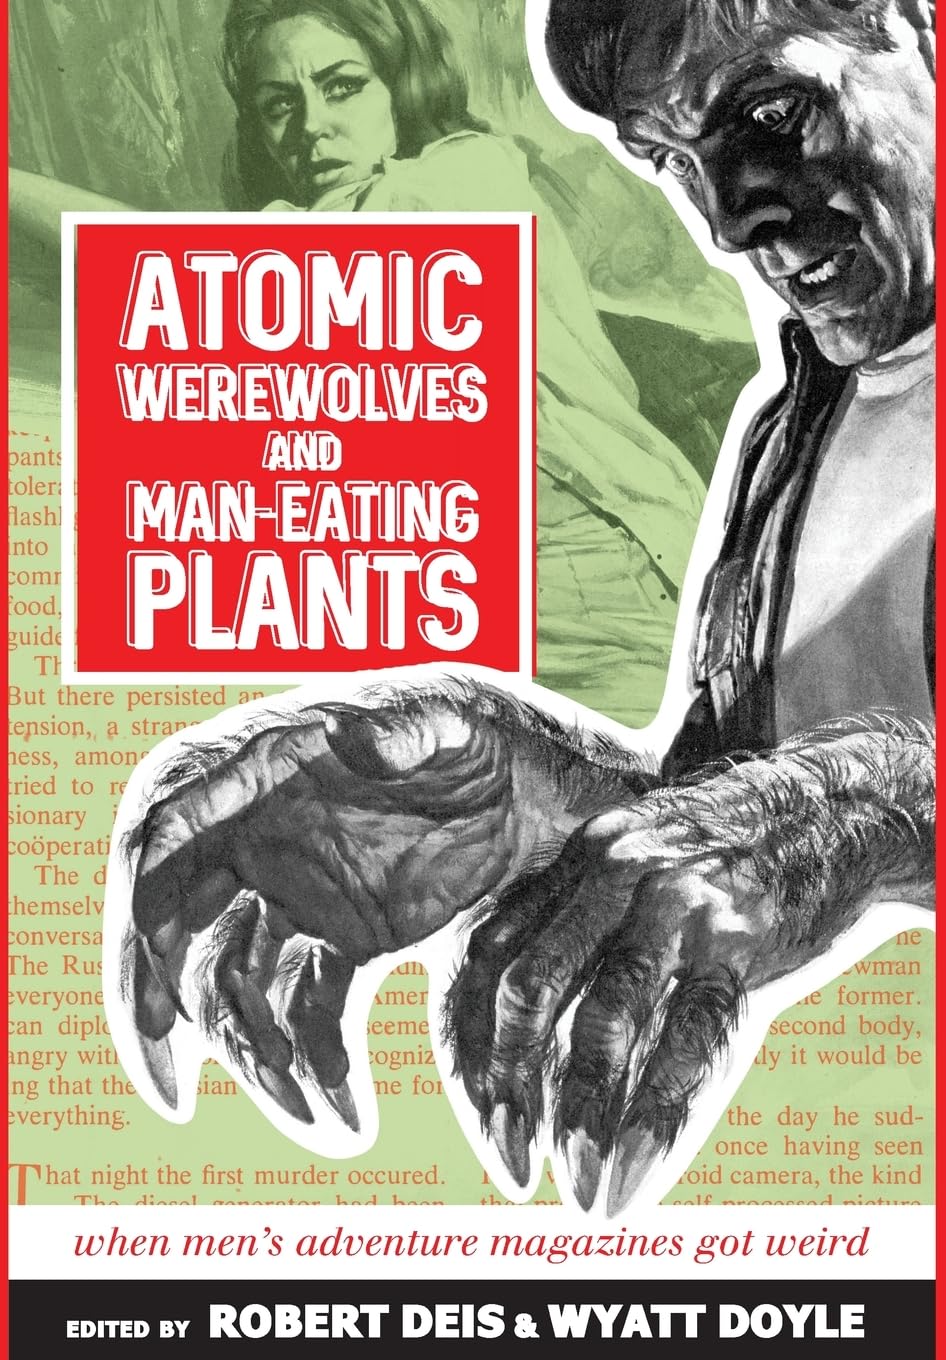 Atomic Werewolves and Man-Eating Plants: When Men's Adventure Magazines Got Weird (Men's Adventure Library) - Expanded Hardcover Edition